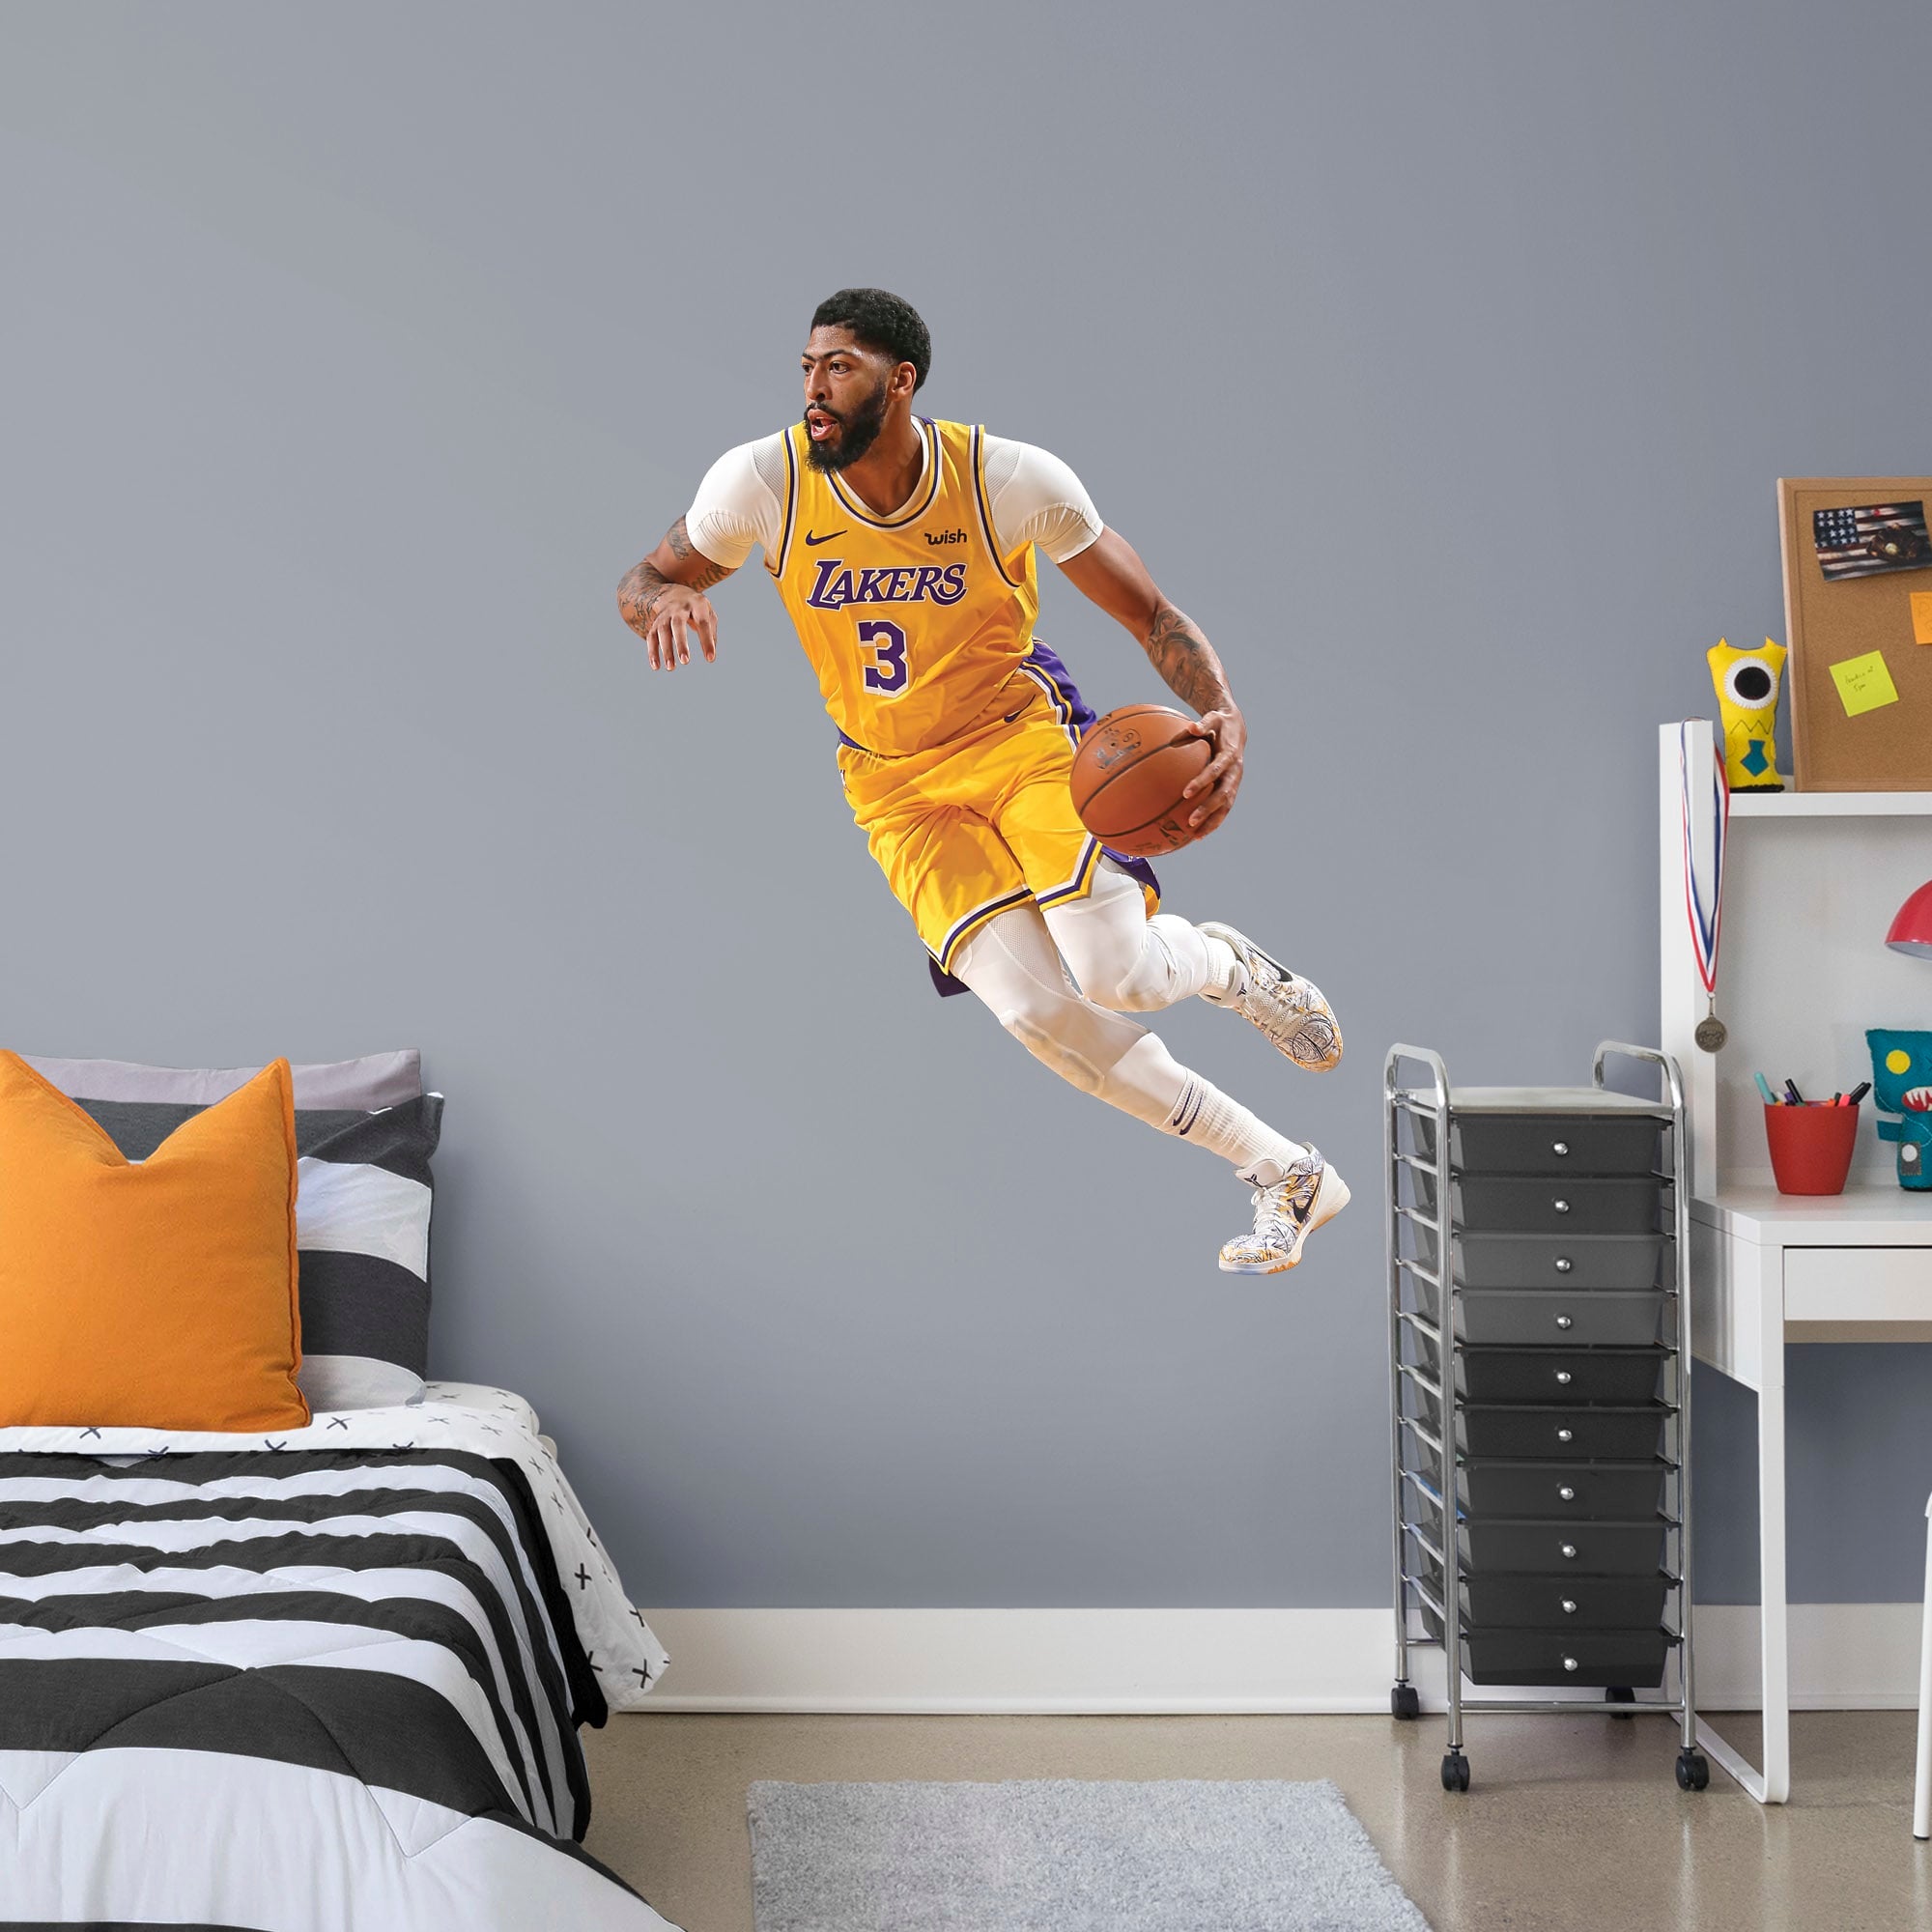 Anthony Davis for Los Angeles Lakers: Icon Jersey - Officially Licensed NBA Removable Wall Decal Giant Athlete + 2 Decals (32.5"